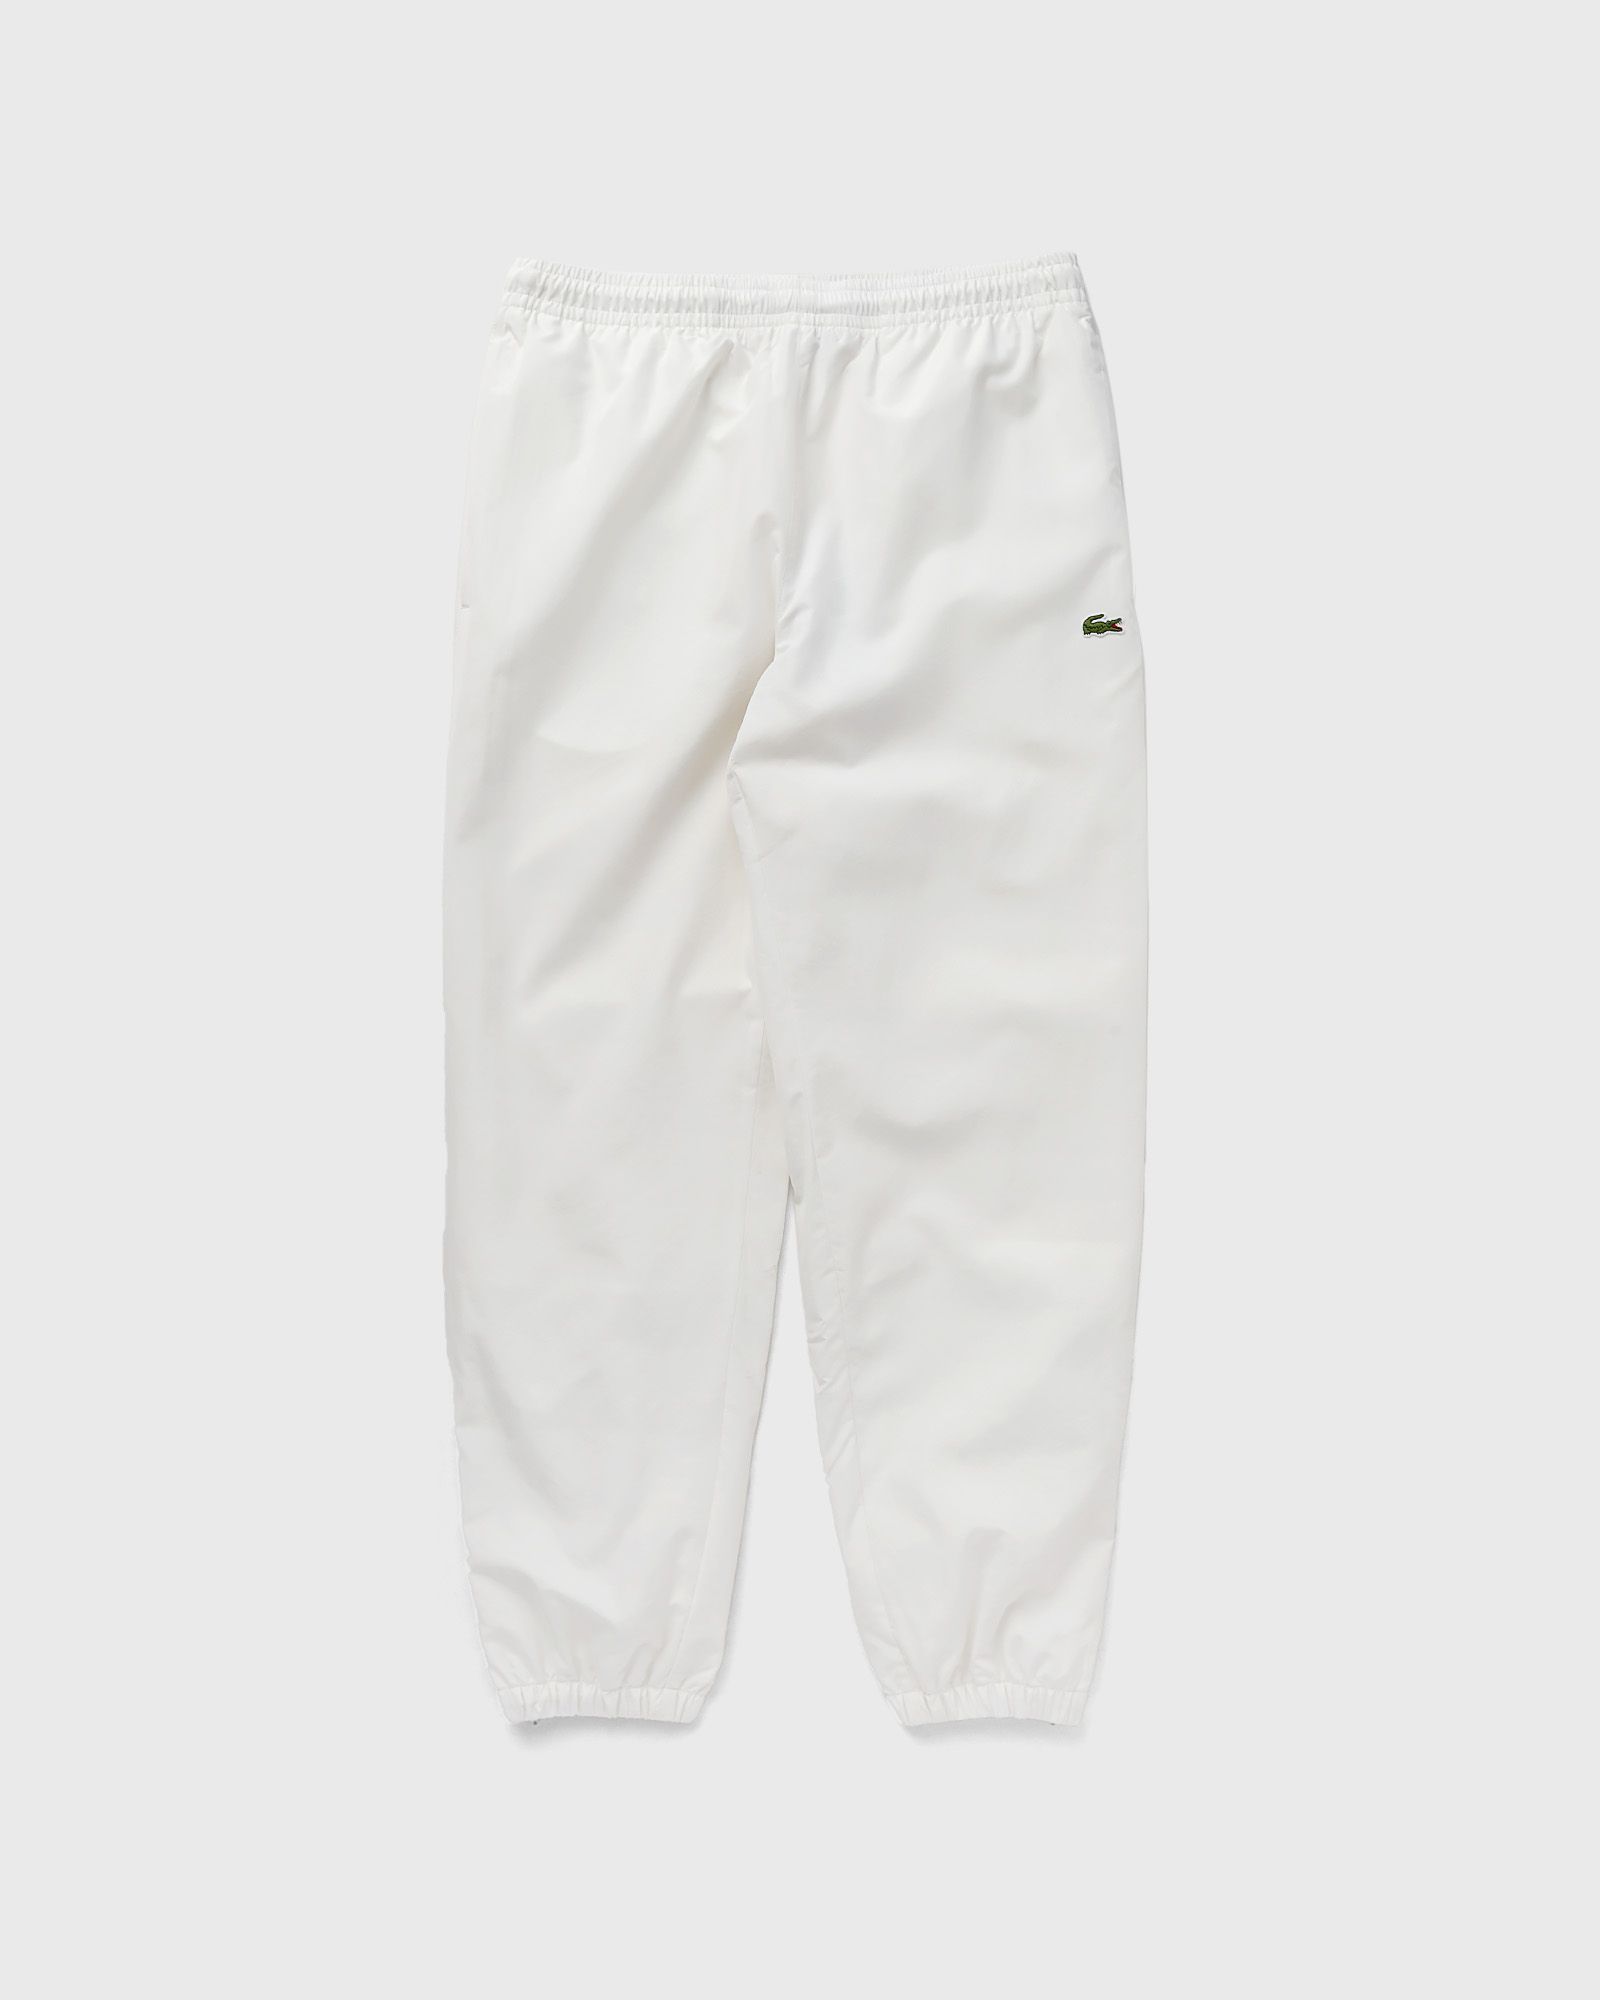 Lacoste - trackpant men track pants white in größe:xxl